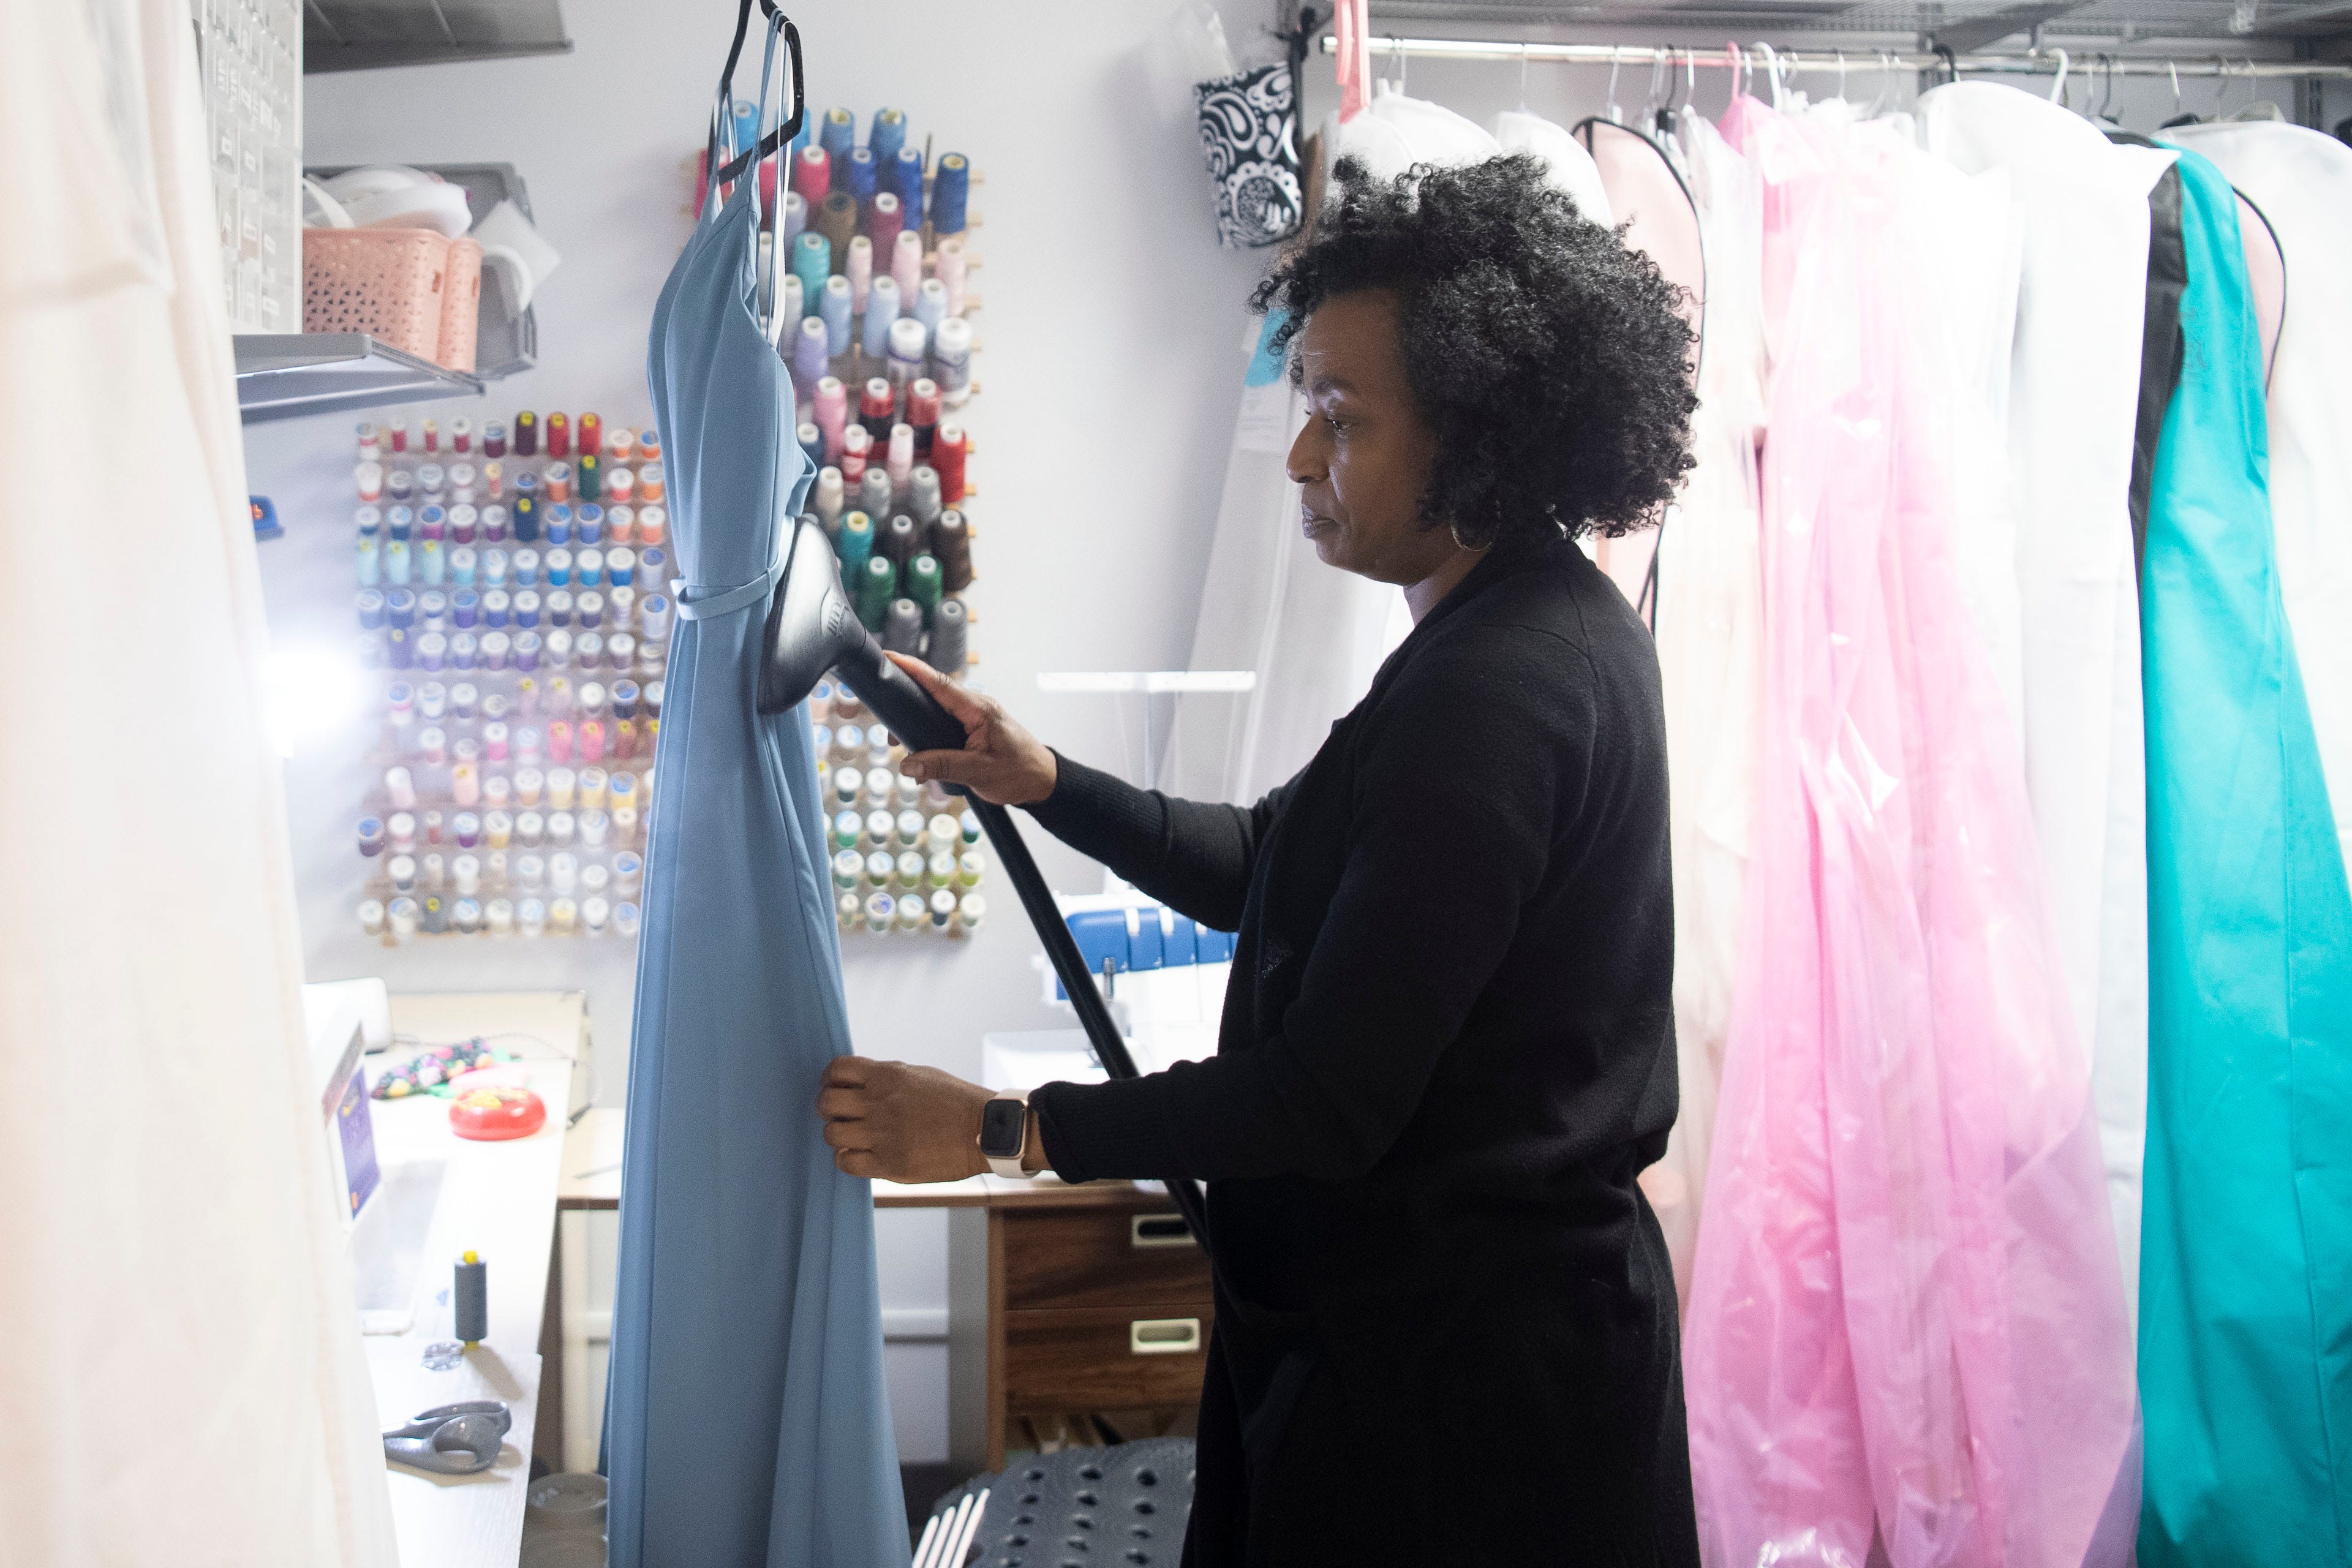 Kamesha Bowen-Jenkins steams a dress for a customer at her business Hem It Up. She opened her brick-and-mortar store on Ray Mears Boulevard at the height of the pandemic. Despite canceled weddings, brides still came to her for those just-right alterations. They got married in backyards or just wanted that special wedding dress photo.